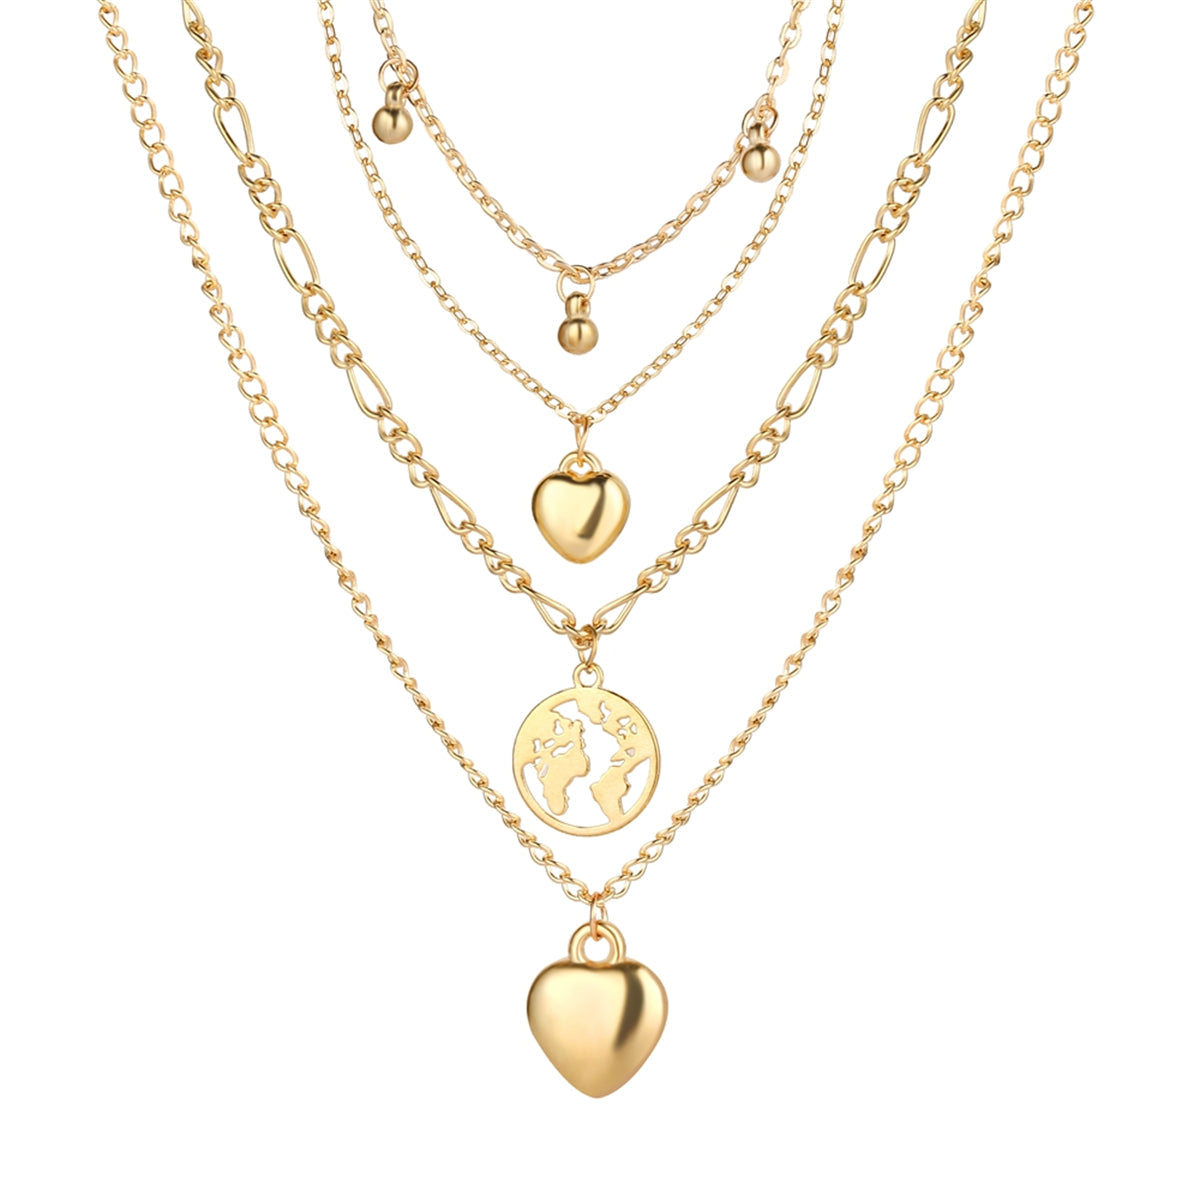 18K Gold-Plated Heart Map Layered Pendant Necklace